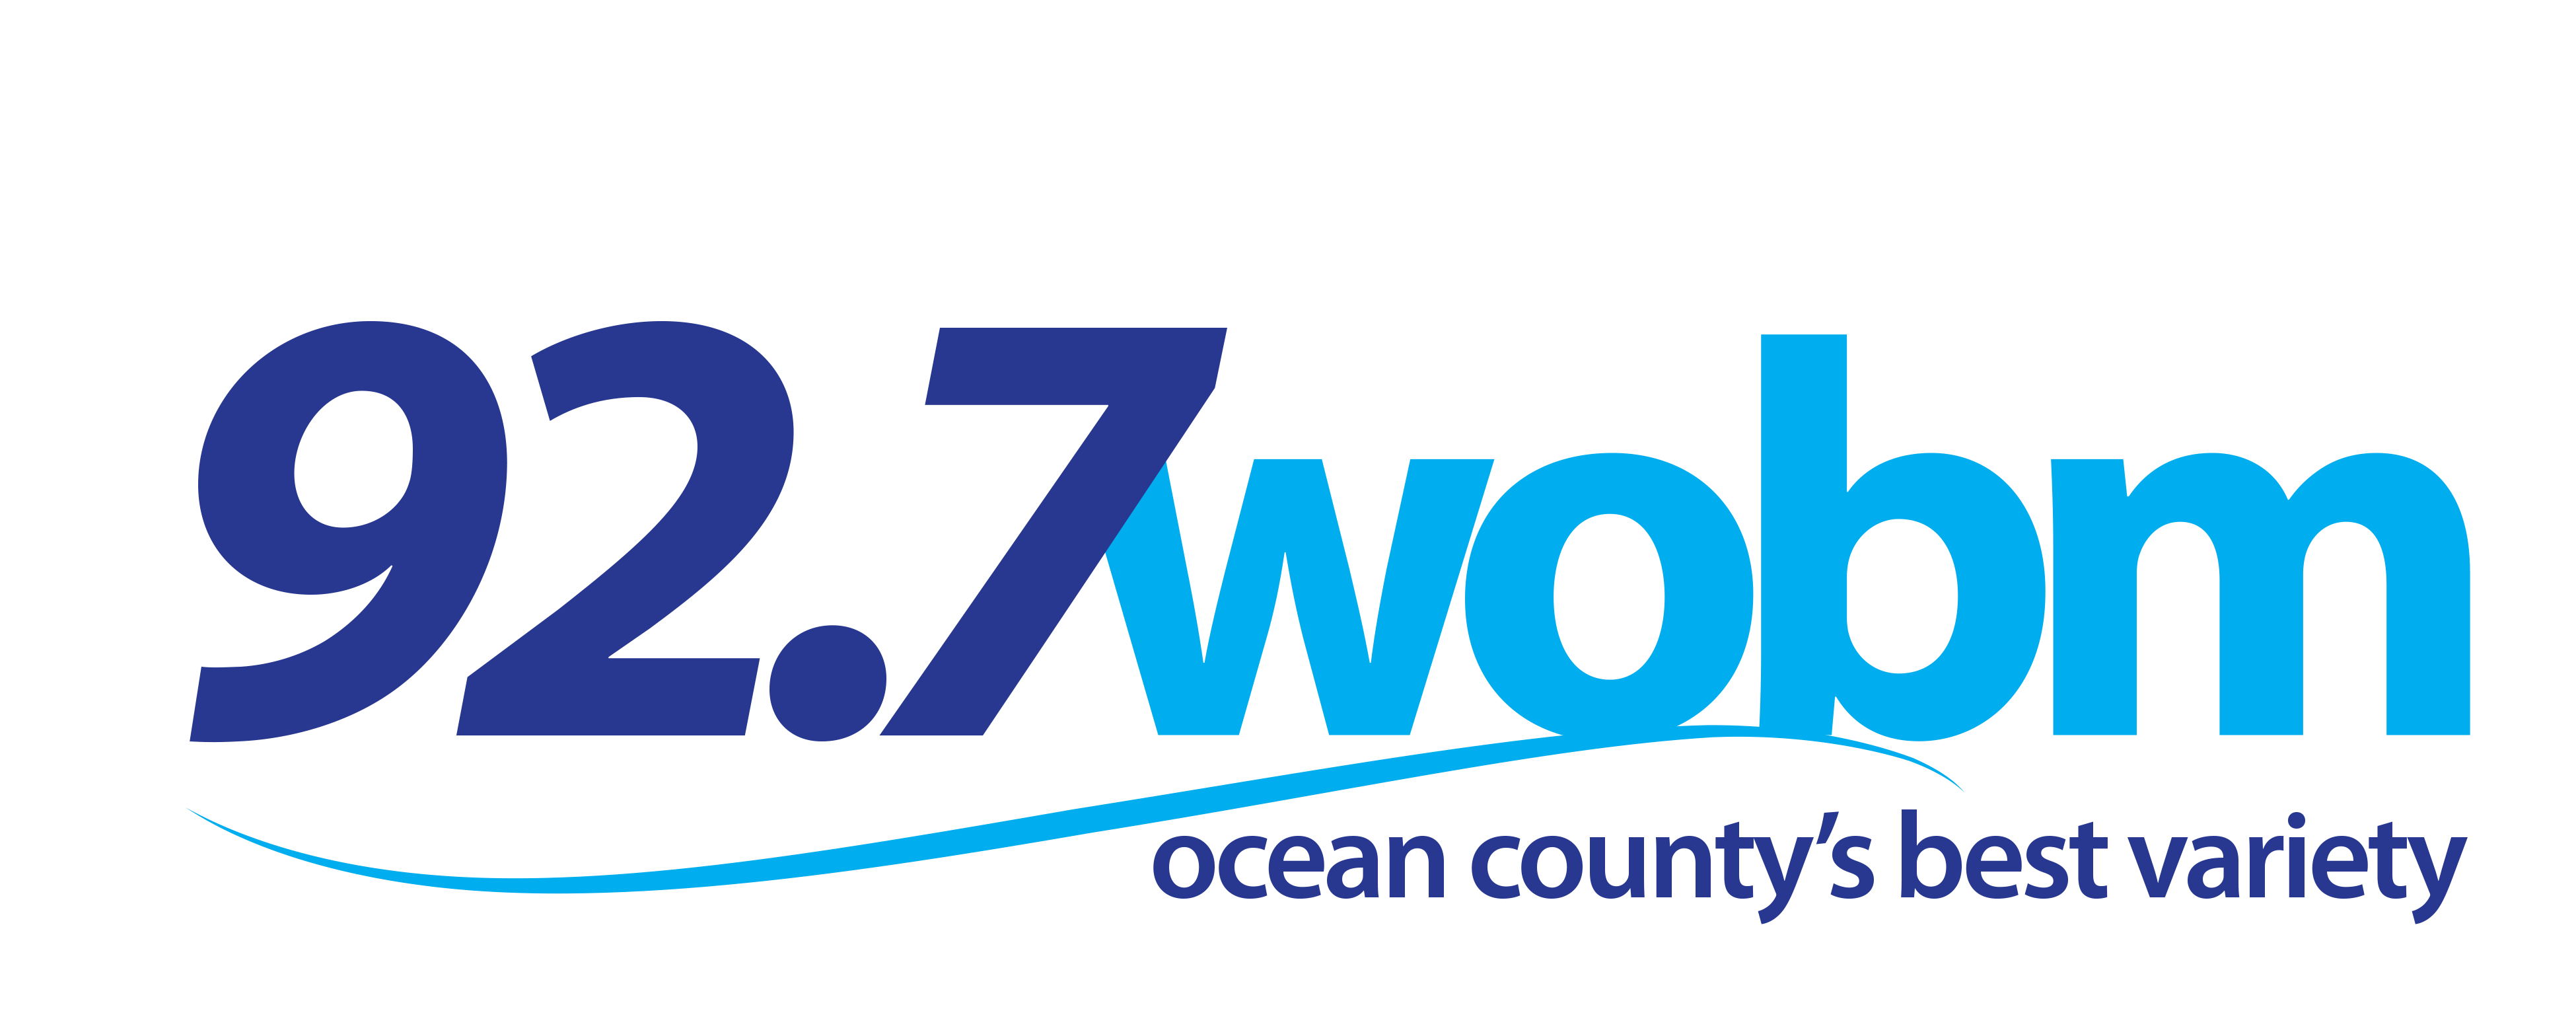 92.7 WOBM - Ocean County's Hometown Station!